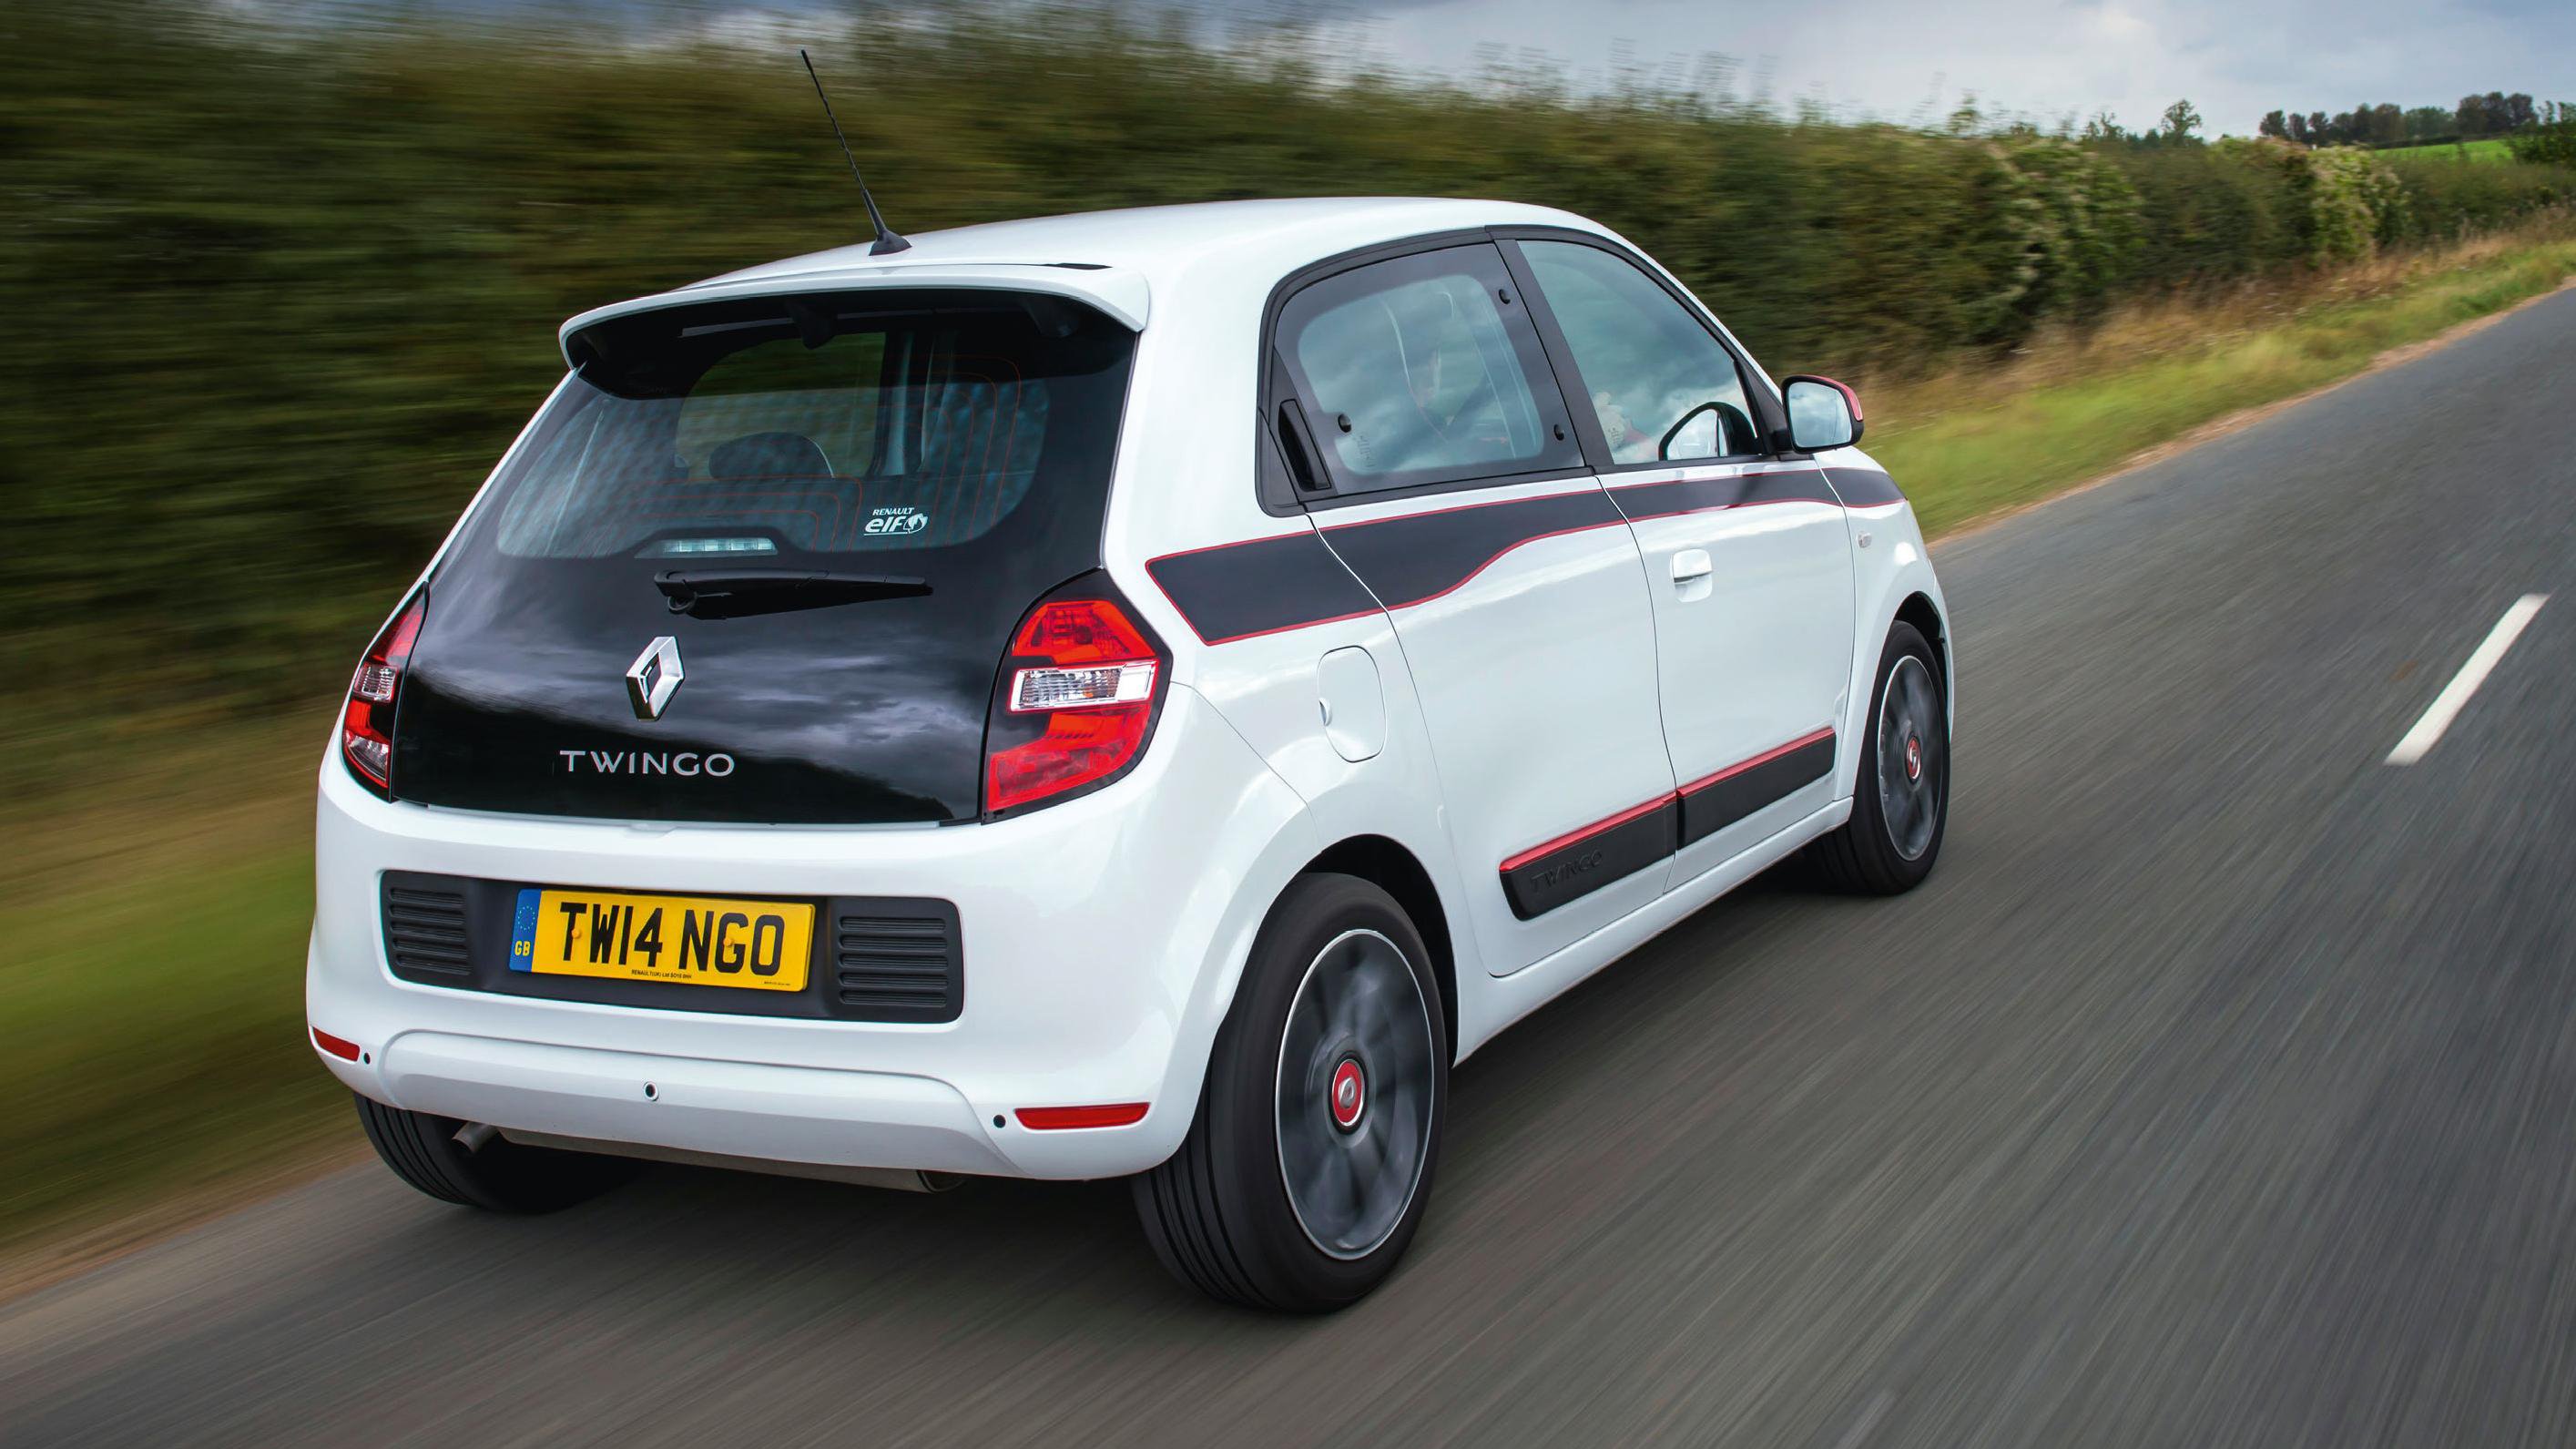 Renault Twingo exterior - Rear Left Angled